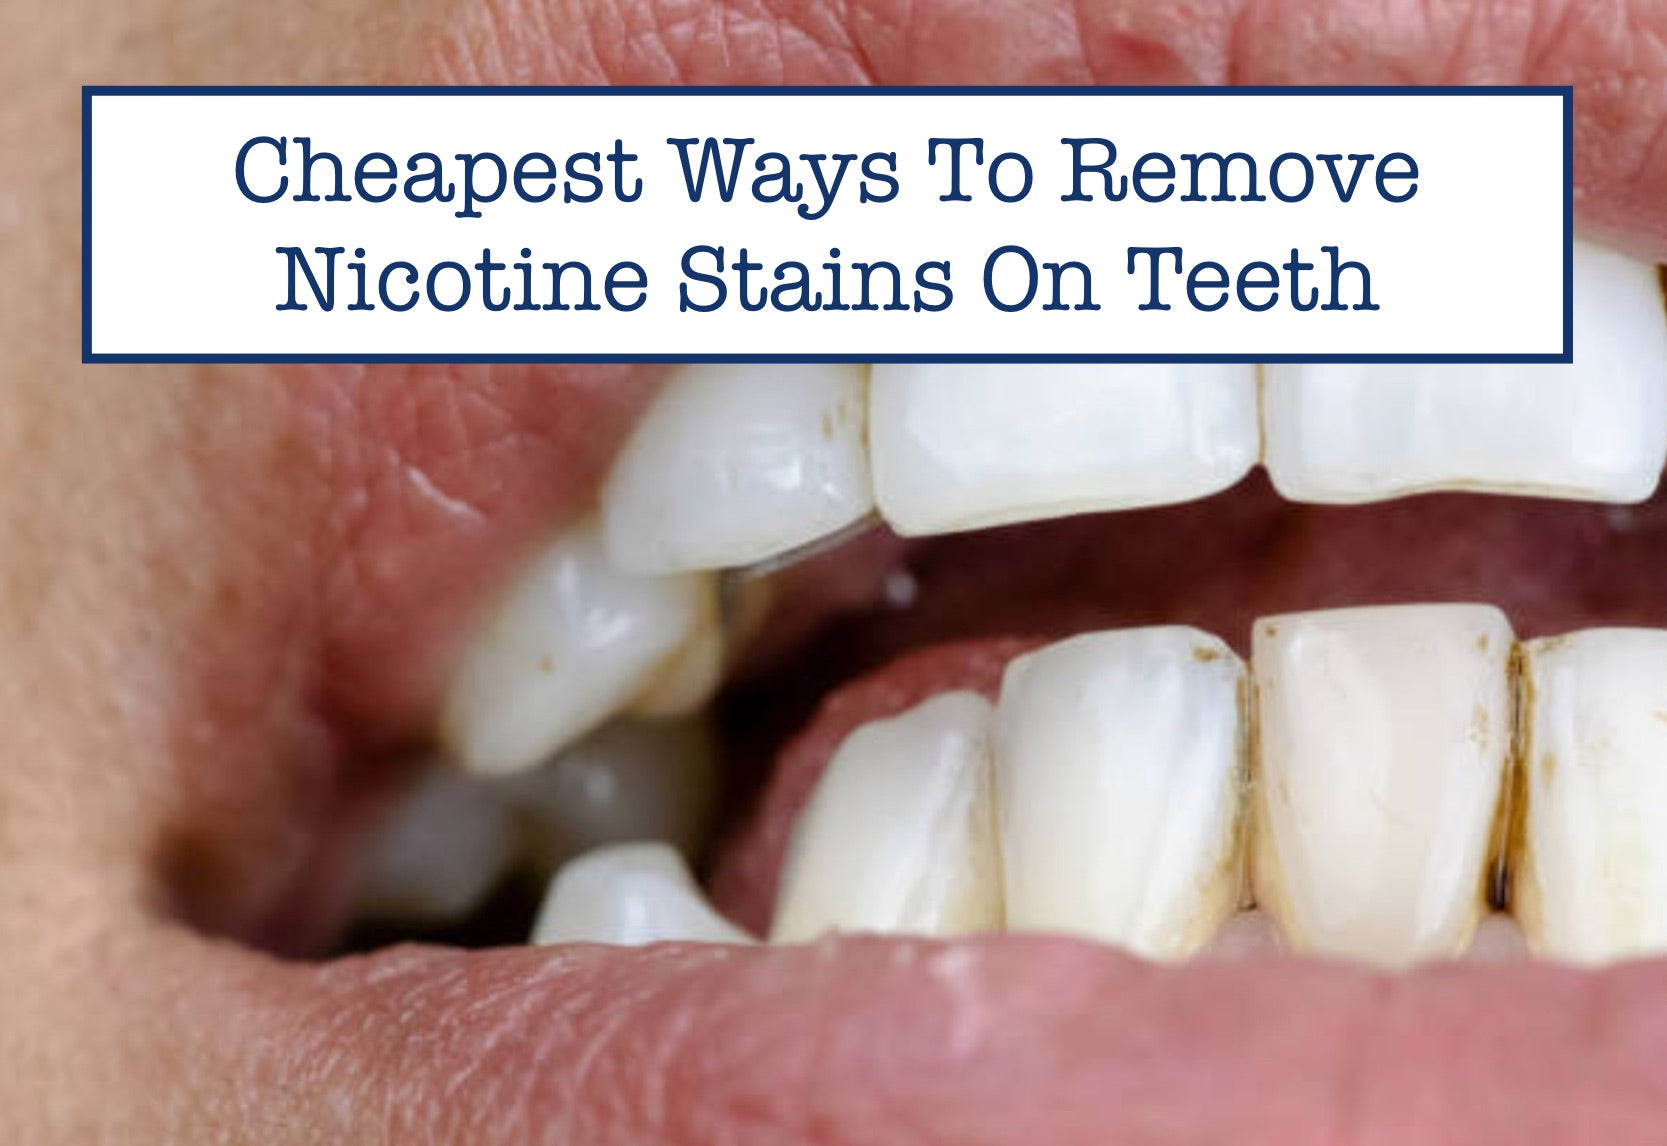 Cheapest Ways To Remove Nicotine Stains On Teeth